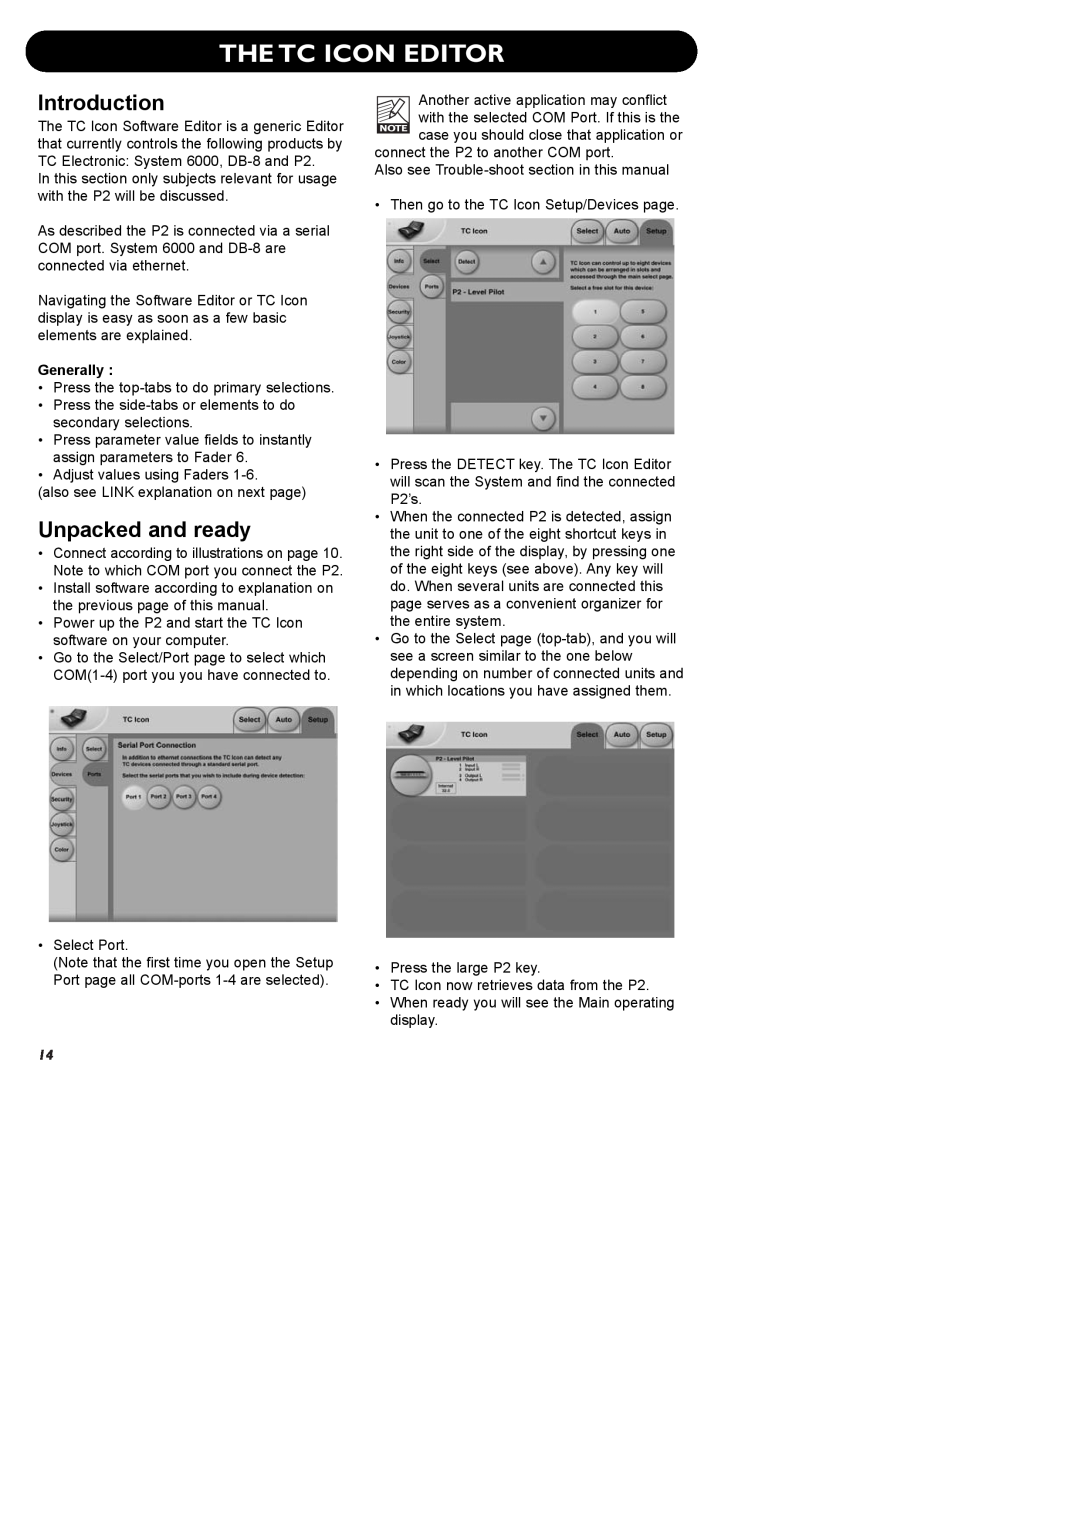 TC electronic SDN BHD P2 manual The Tc Icon Editor, Introduction, Unpacked and ready, Generally 